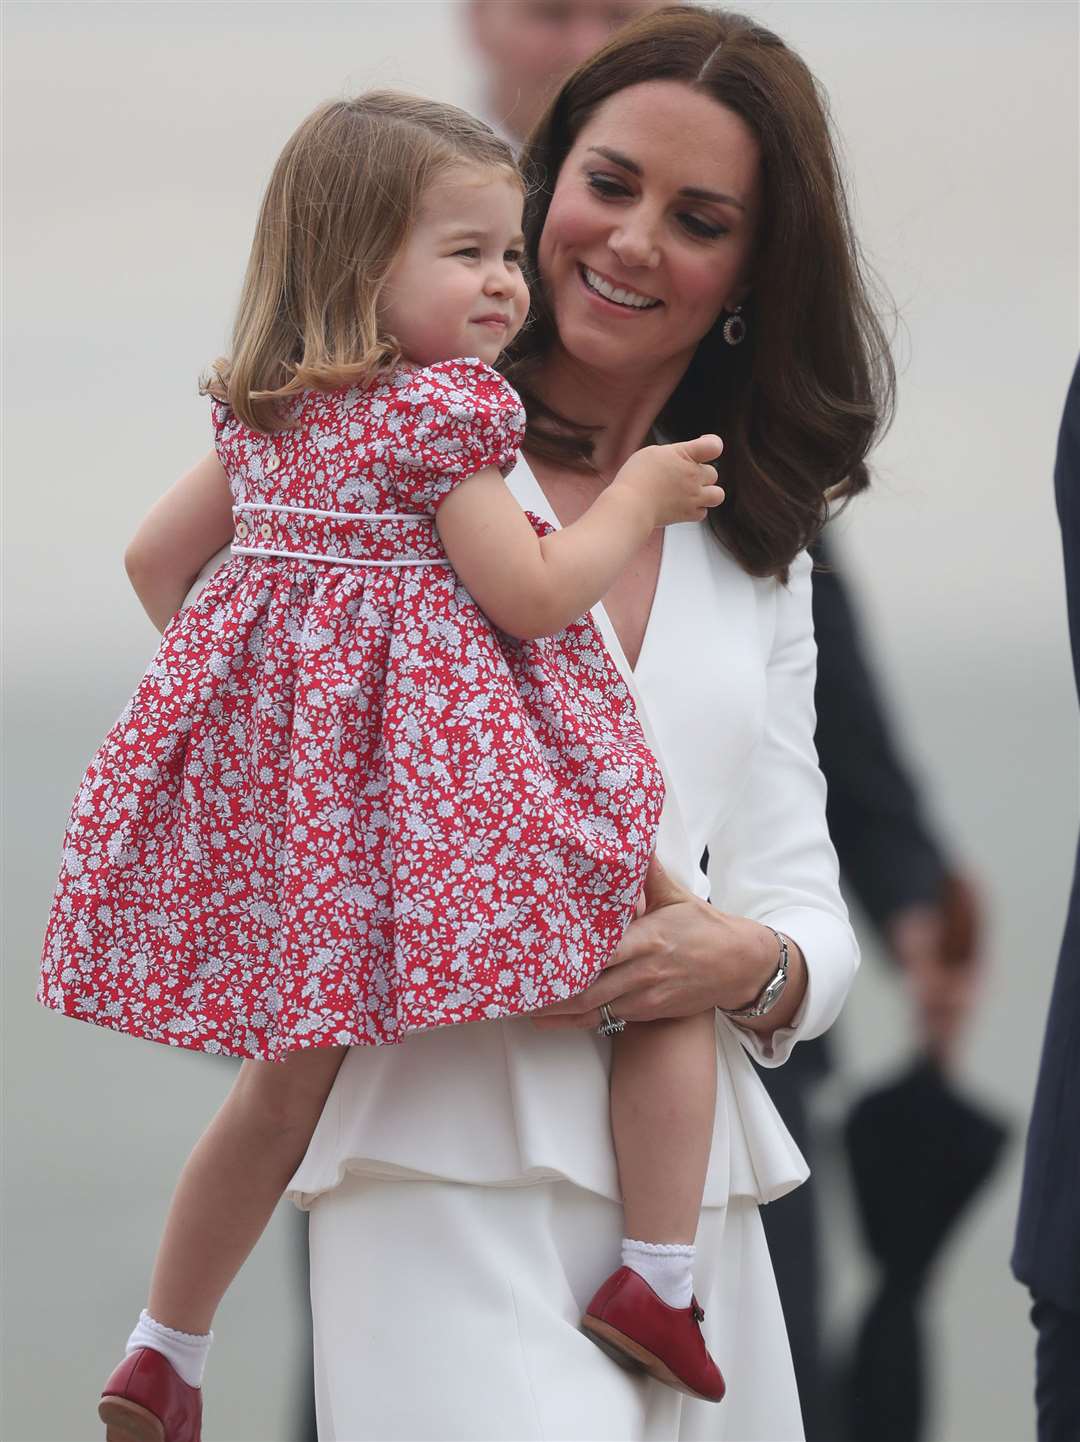 The Duchess of Cambridge with Princess Charlotte